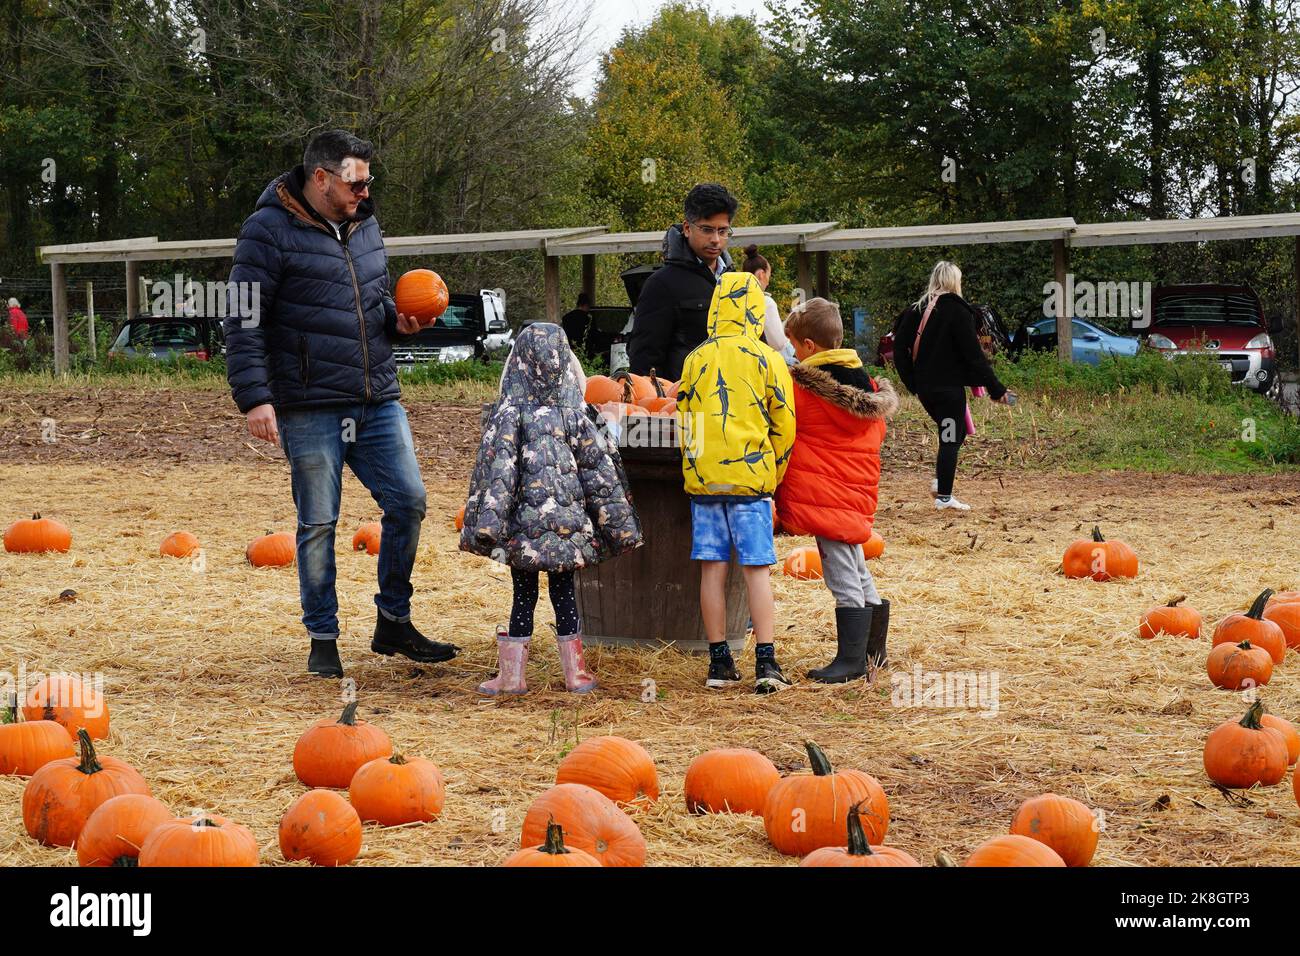 Exeter, UK - October 2022: Families visit a pick your own farm to pick and buy pumpkins for Halloween decoration Stock Photo